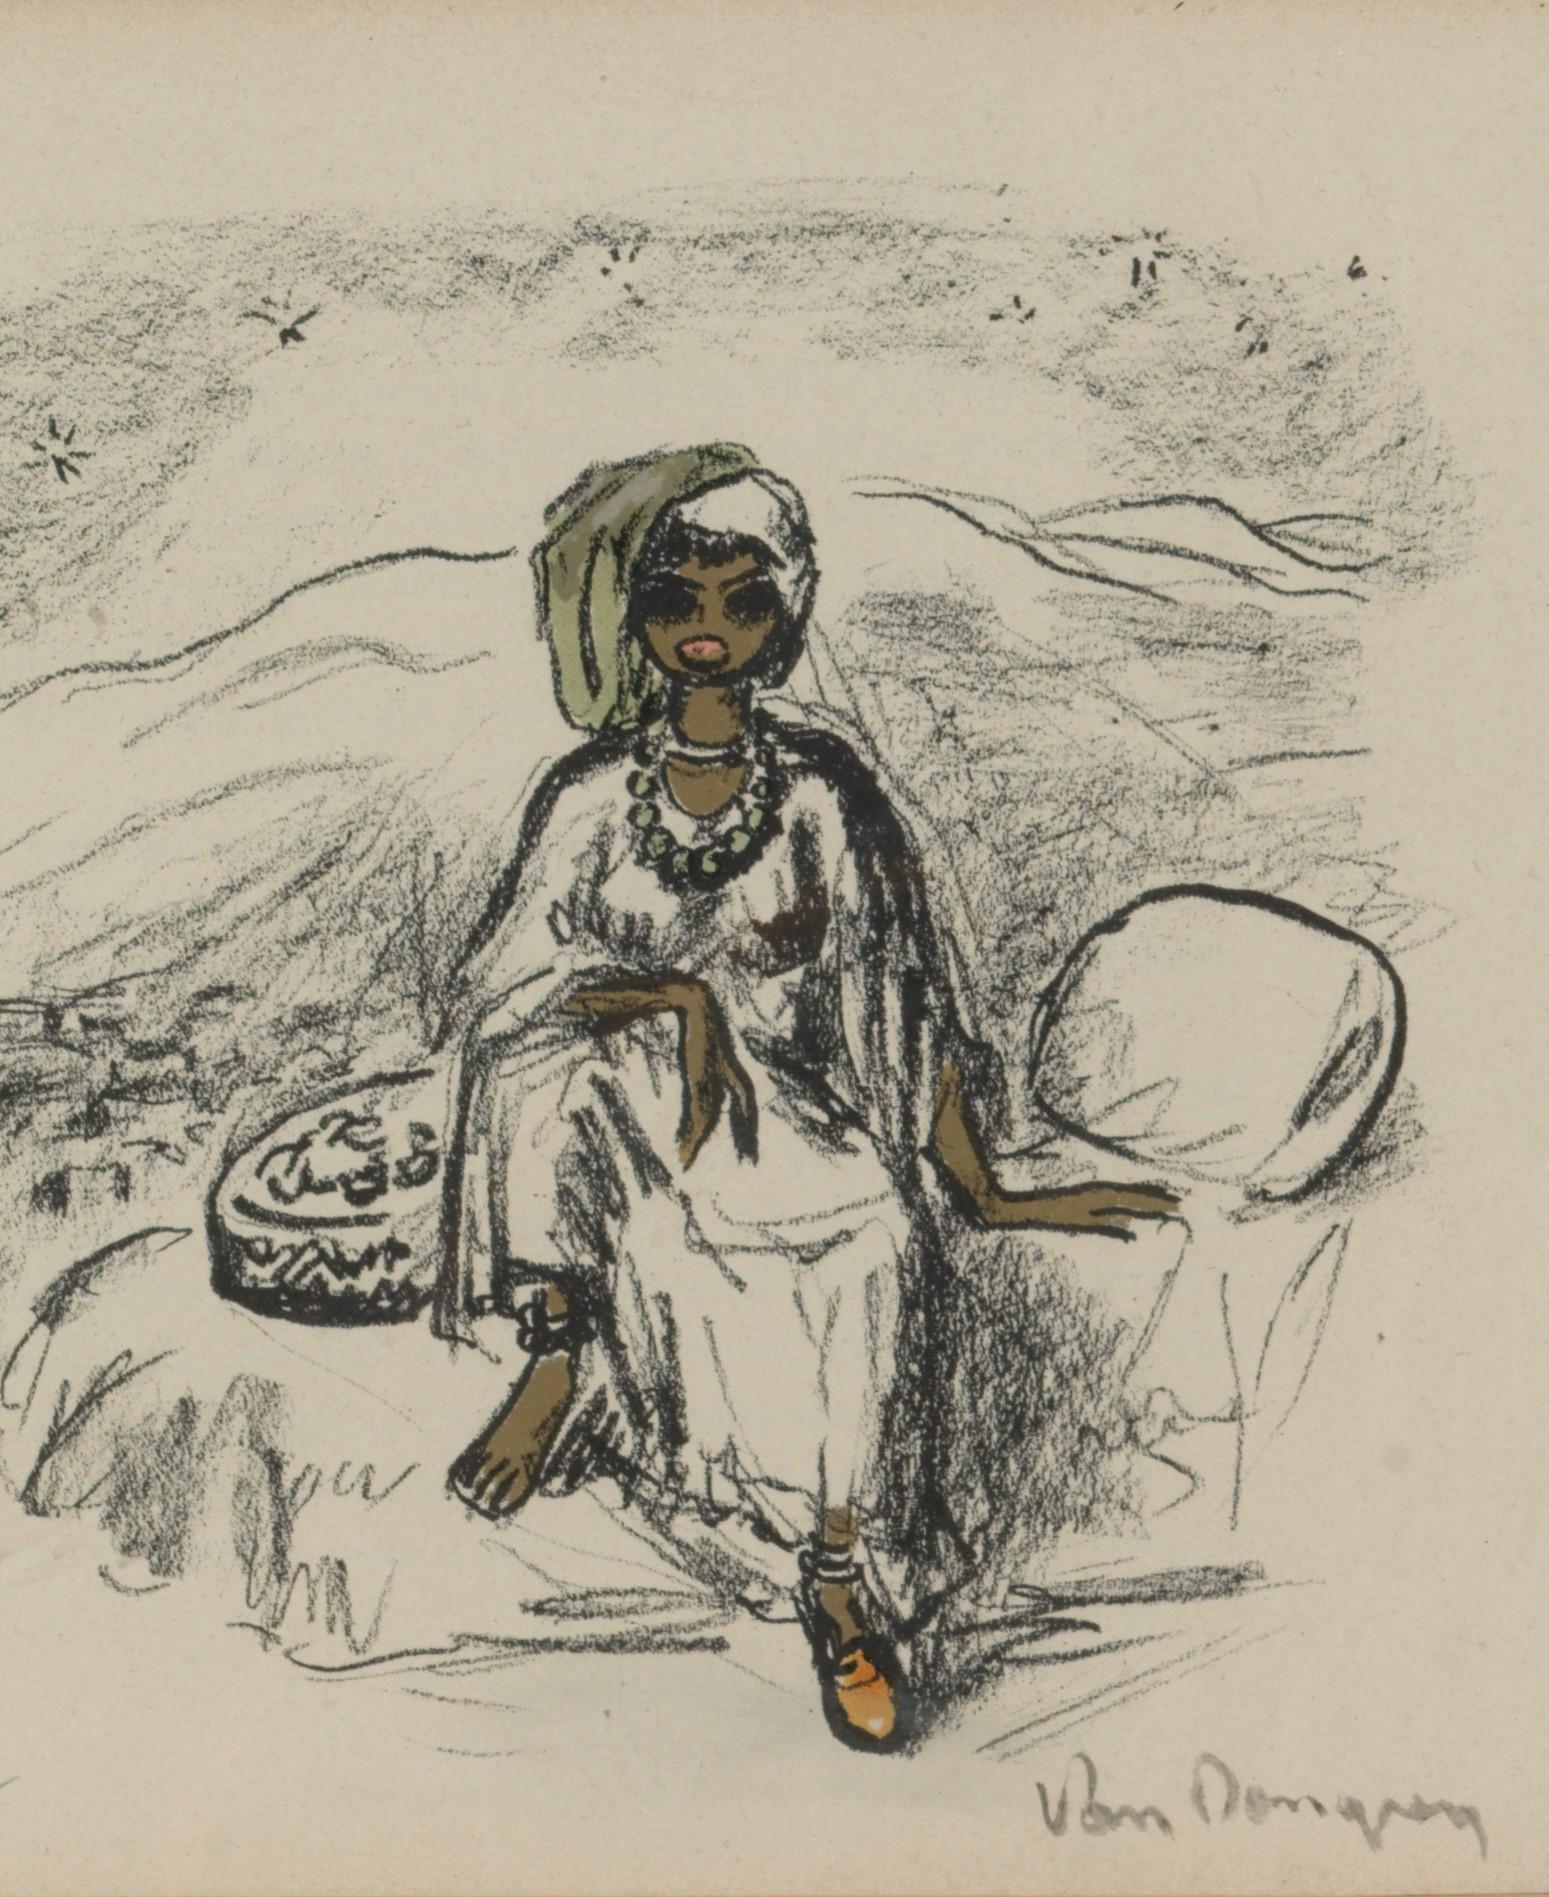 The lithography shows a ethnical woman sitting quite relax and with a smile on a bed. She’s wearing loose fitting robes and a tulle band wrapped around her head, the beaded necklace she is wearing is visible from afar. Her right foot is resting on